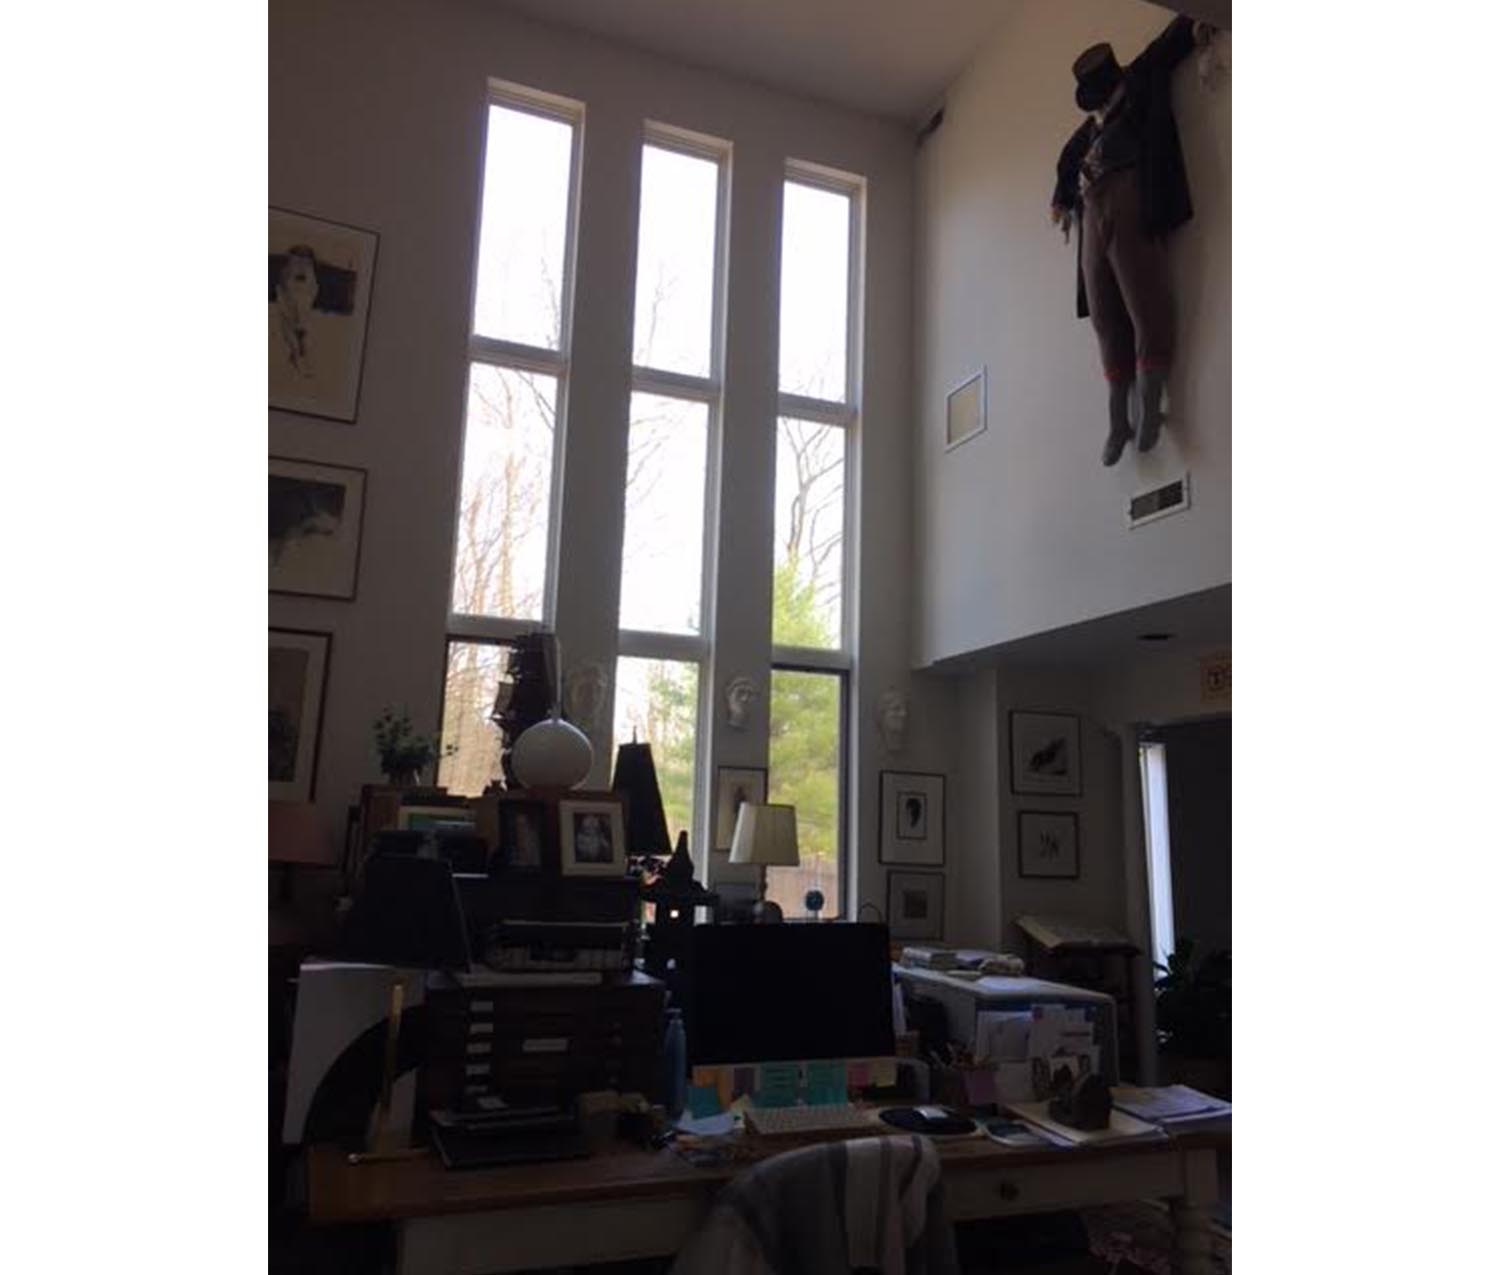 an artist's studio, with a desk containing picture frames, a printer, and a computer. in the background, a sculpture of a body hangs from the ceiling and many trees can be seen through three floor-to-ceiling windows 